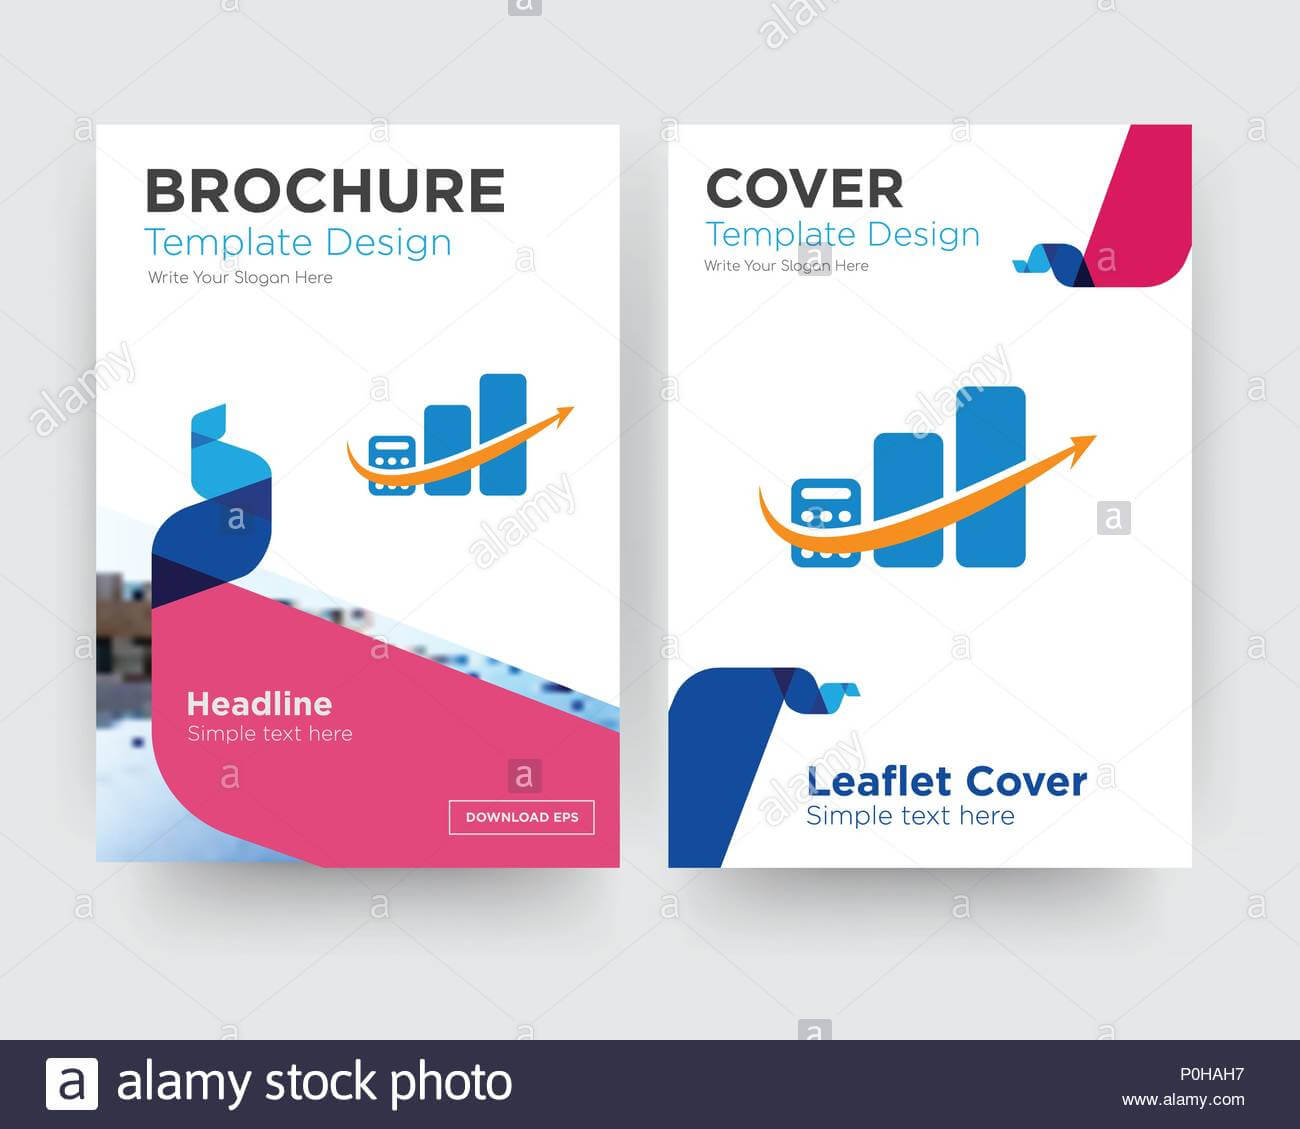 Accounting Brochure Flyer Design Template With Abstract Intended For Accounting Flyer Templates